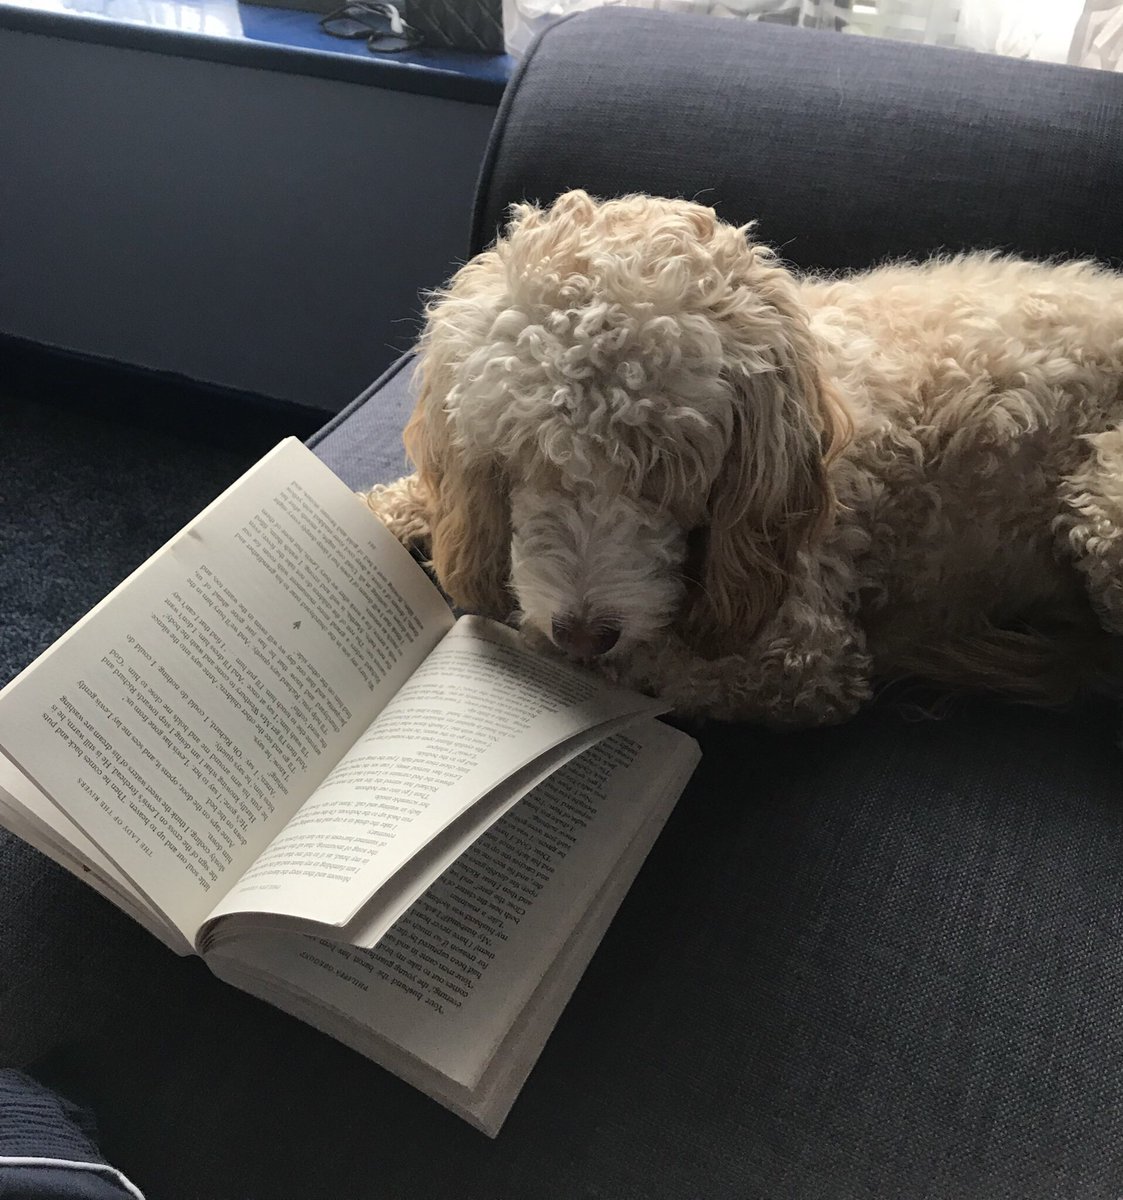 Gaz tried to enjoy #theladyoftherivers but his pooch Patti wanted a look first 🐶

#bookworm #bookbloggers #mediablog #blog #philippagregory  #DogsofTwittter #dog